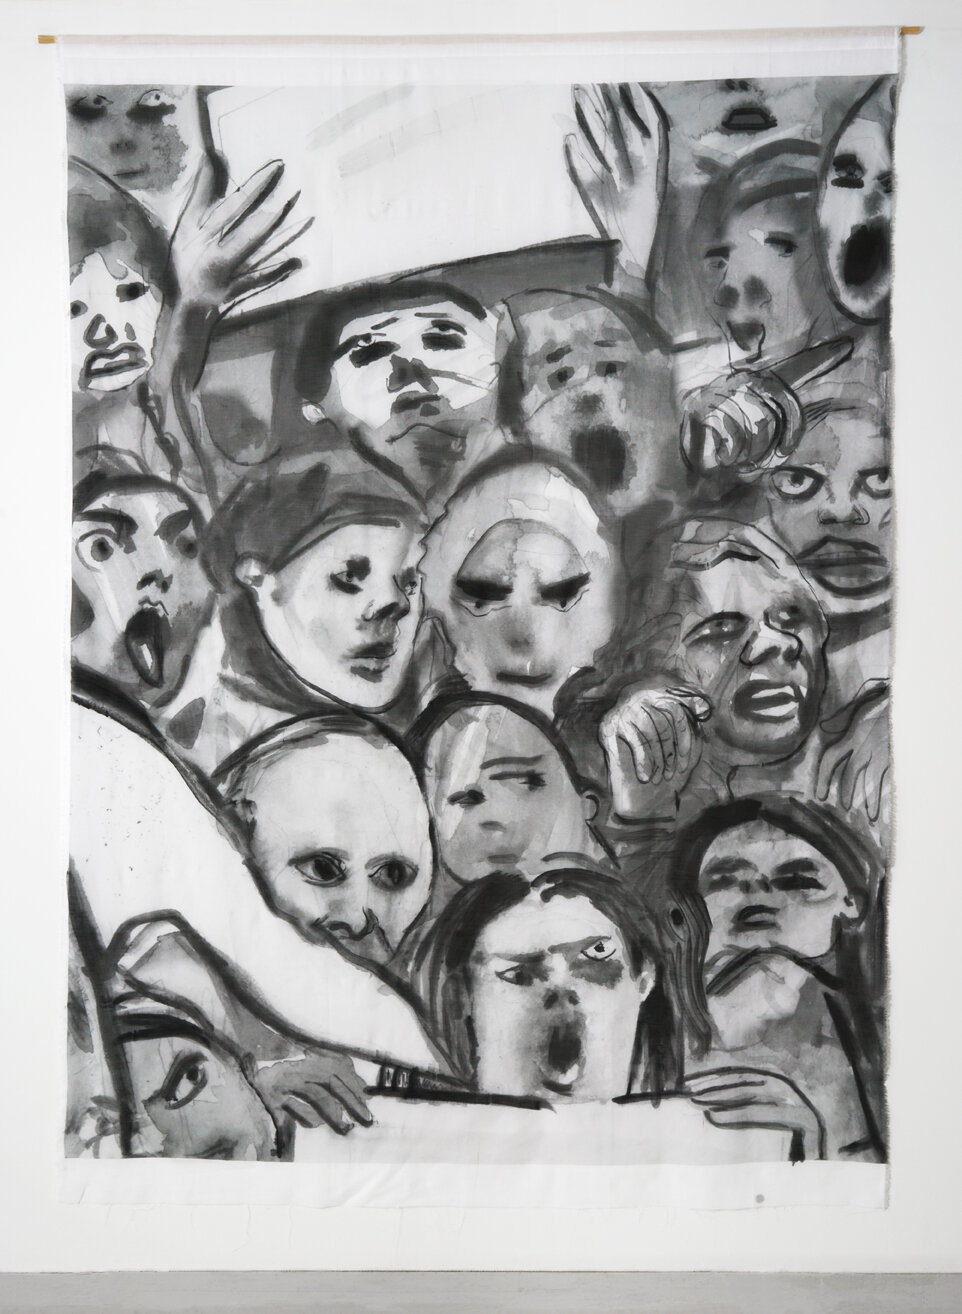    Masses, 2019-2020, watercolor on printed cotton, wood, 83 x 58 in / 210 x 147 cm   